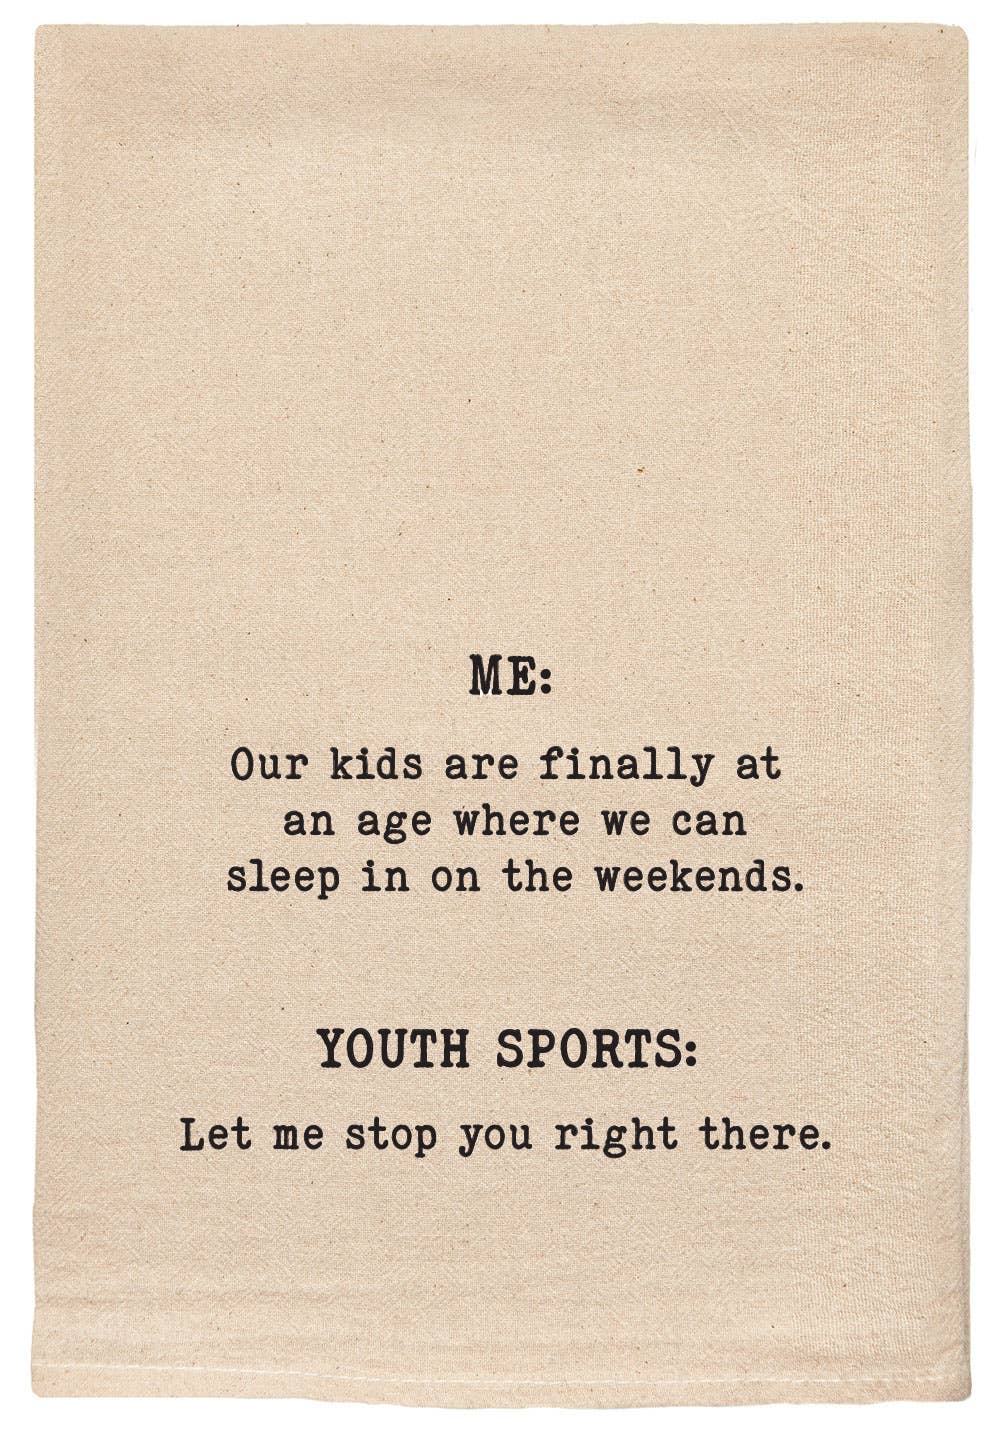 ellembee gift - Our kids are at an age we can sleep youth sports tea towels